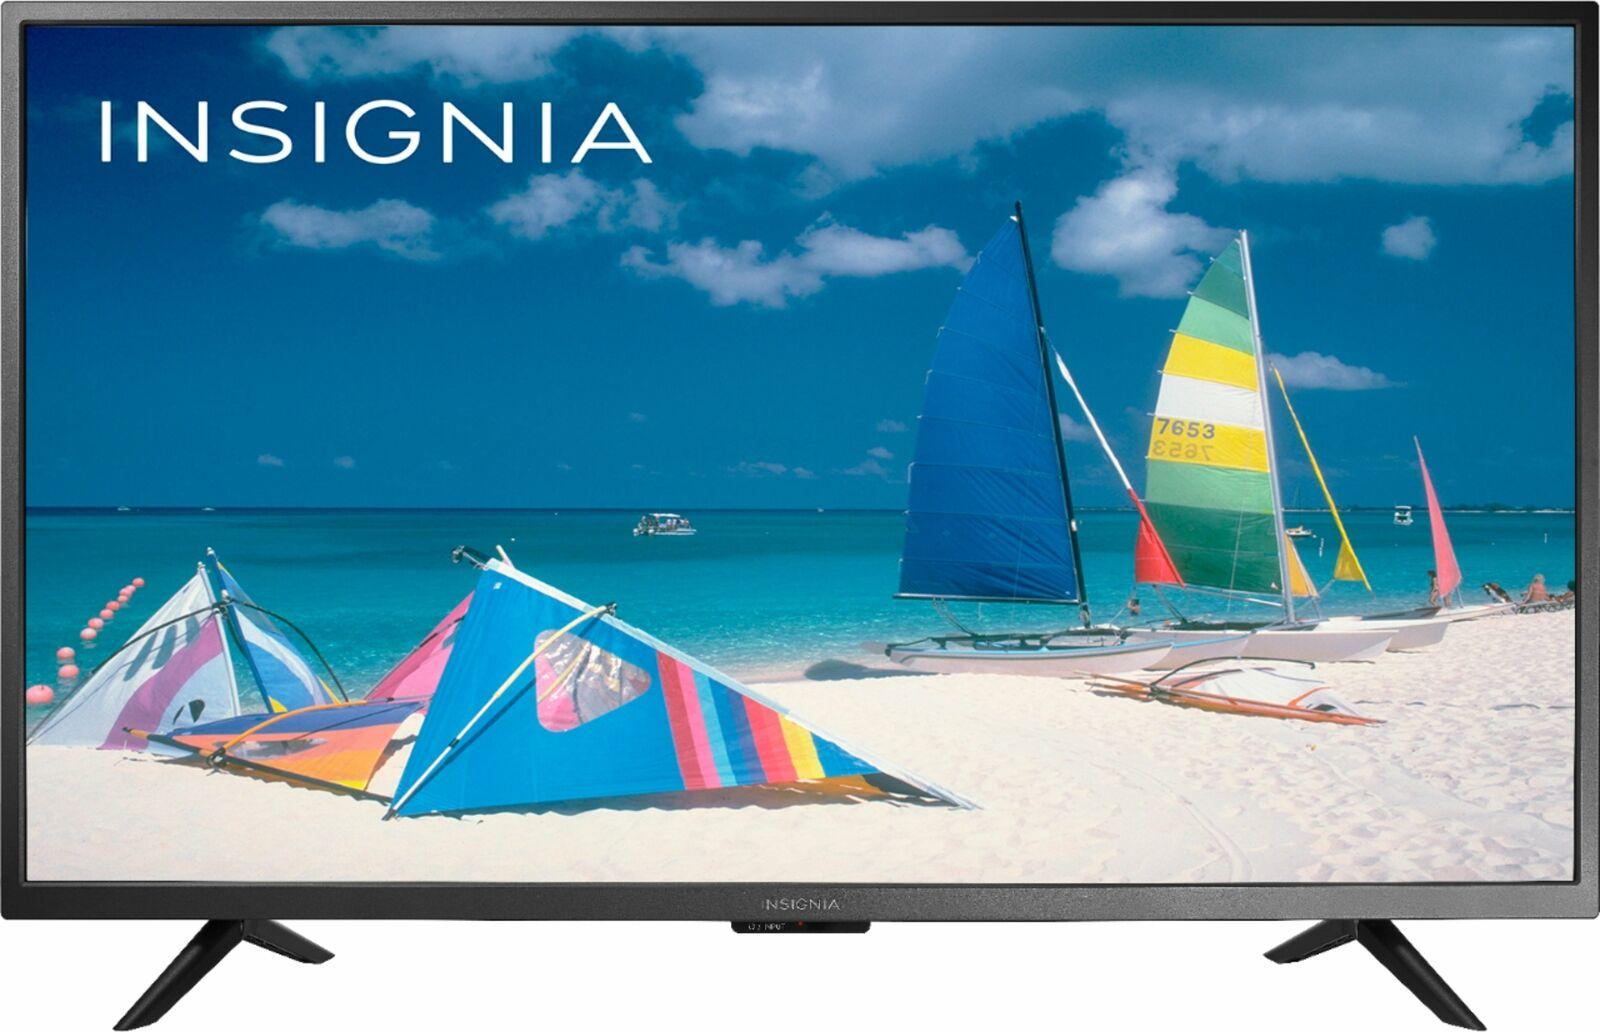 40in Insignia 1080p LED HDTV for $119.99 Shipped